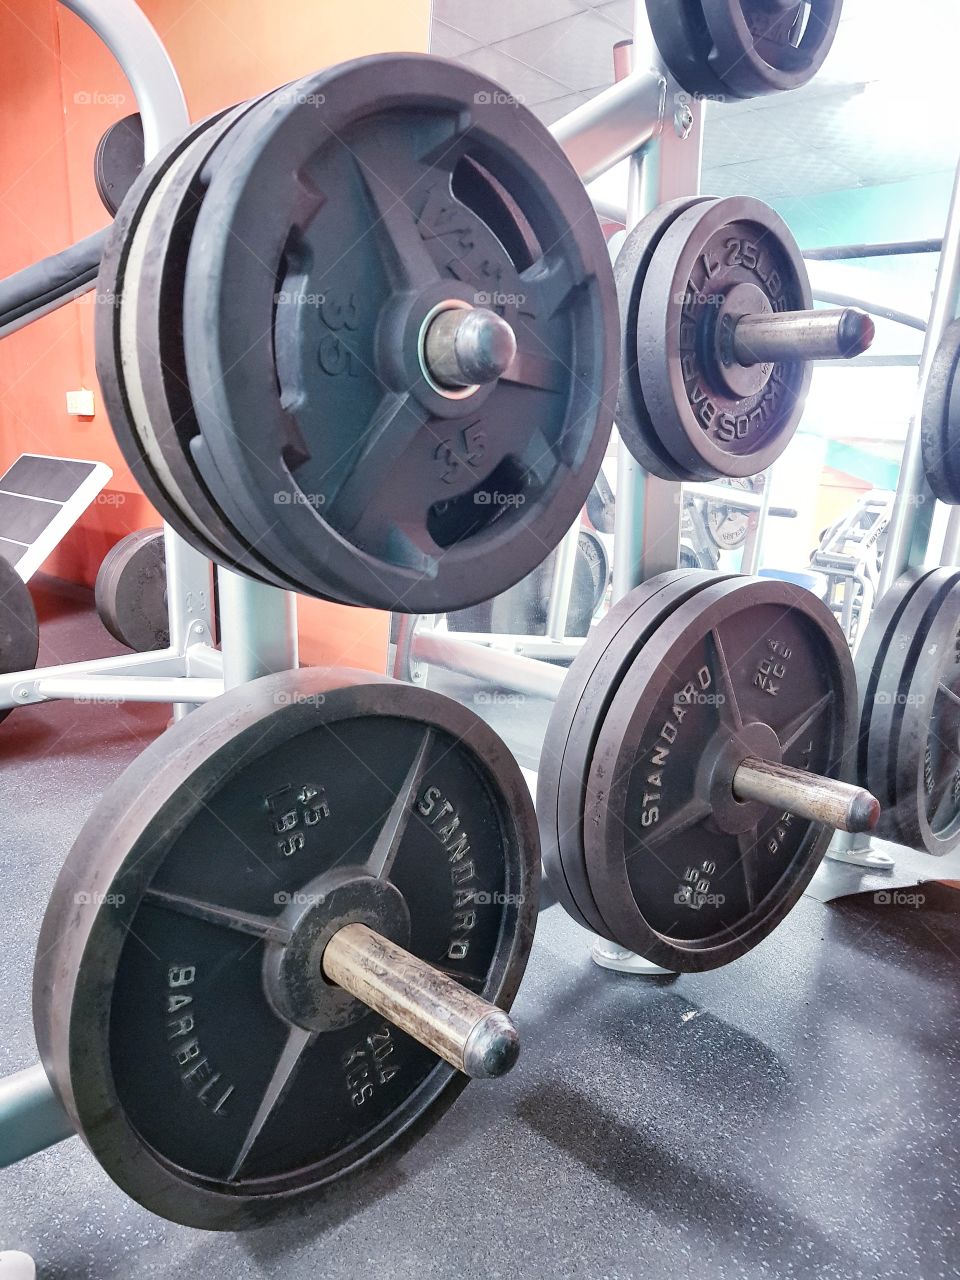 Gym weight plates stacked on squat rack displaying strength, endurance, an escape and happiness